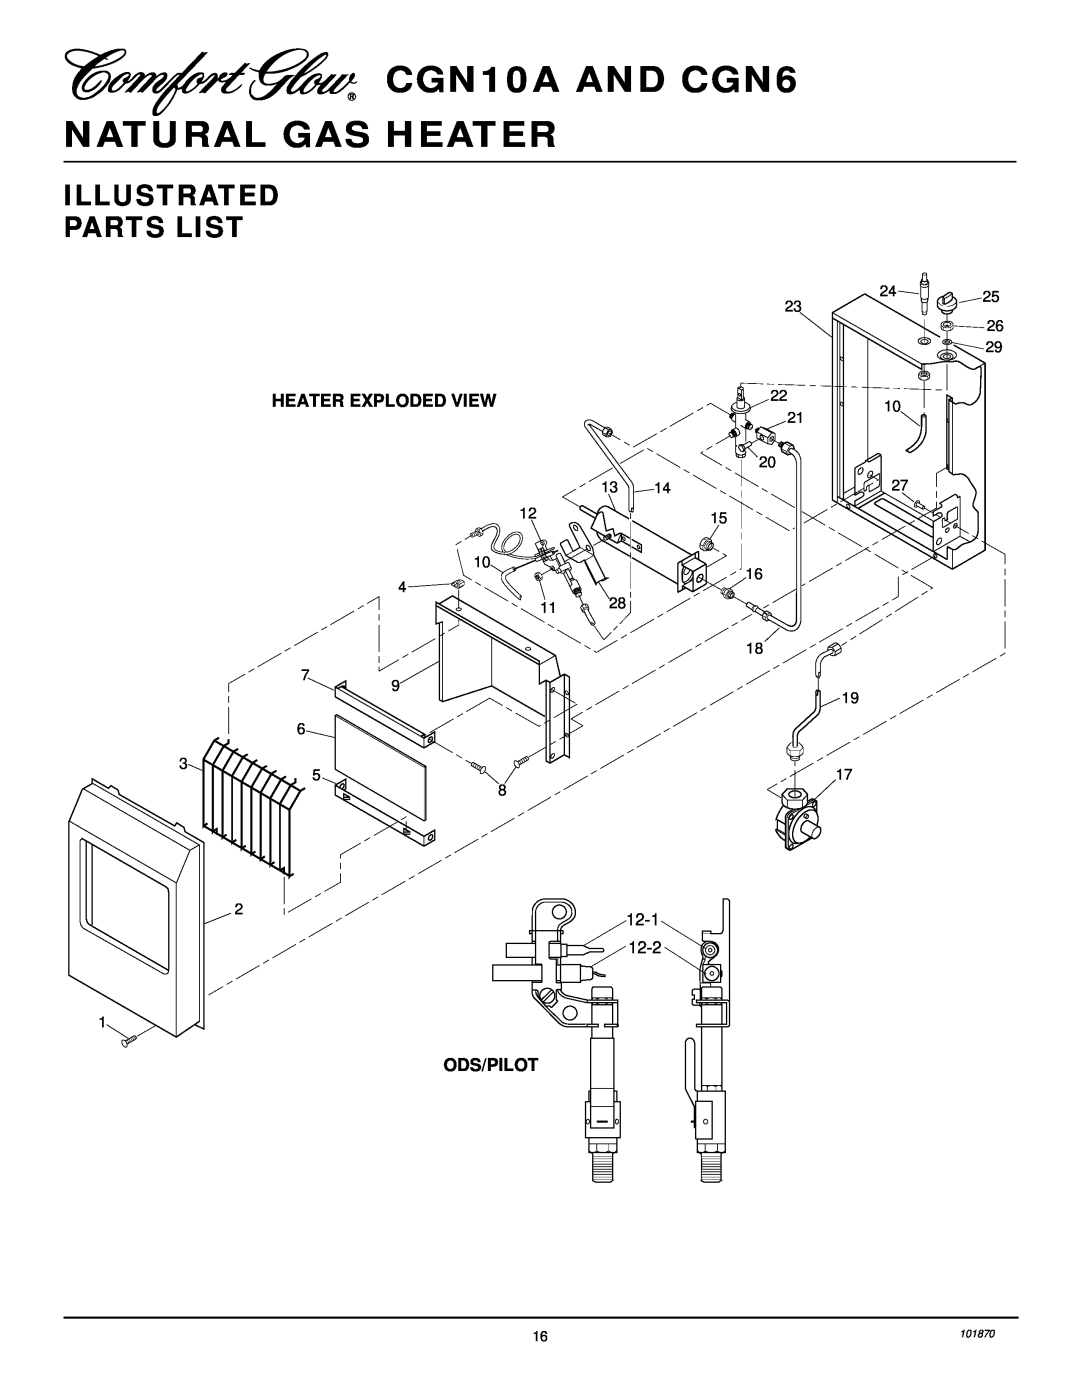 Desa installation manual Illustrated Parts List, CGN10A AND CGN6 NATURAL GAS HEATER, Heater Exploded View, Ods/Pilot 